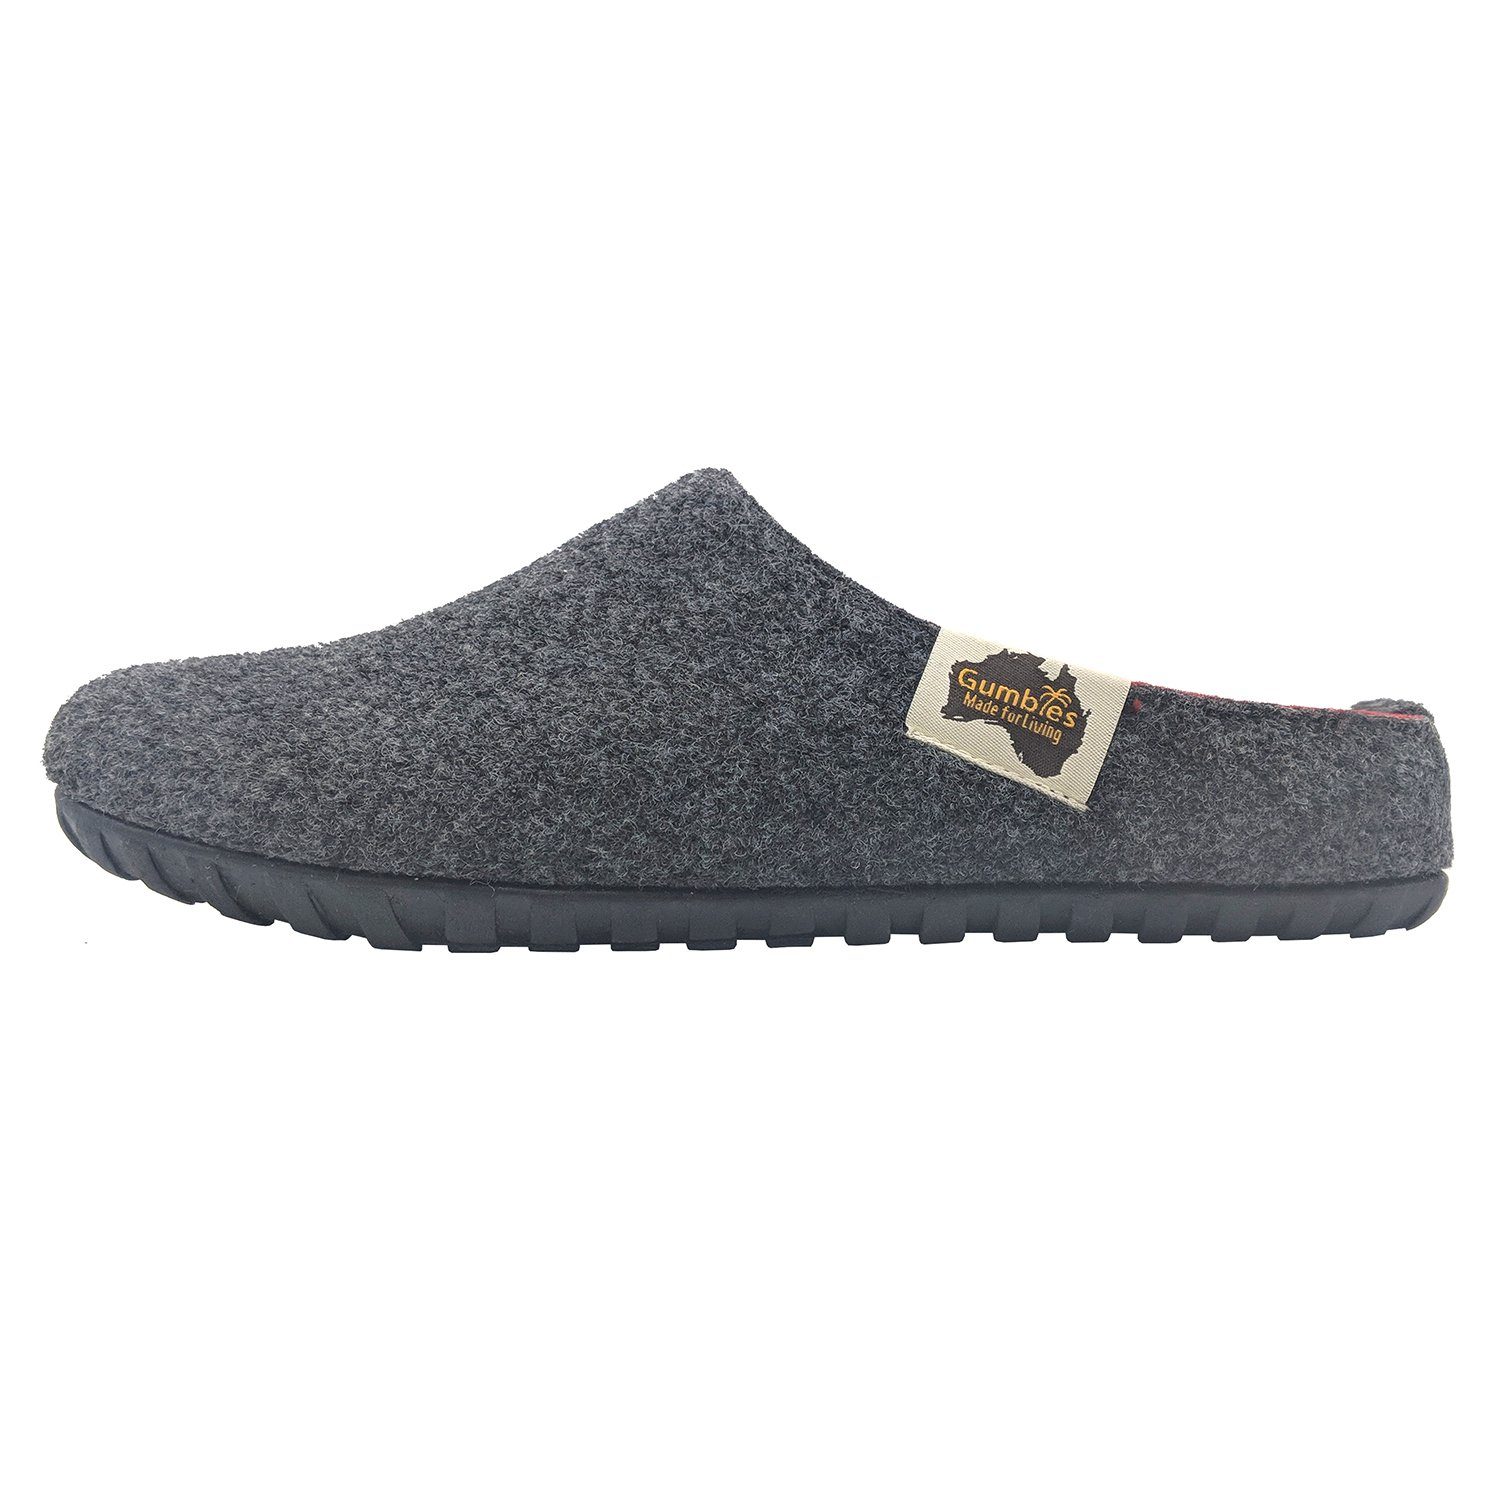 »in Gumbies Designs« Red charcoal-Red Outback in Slipper Charcoal Materialien aus recycelten Hausschuh farbenfrohen